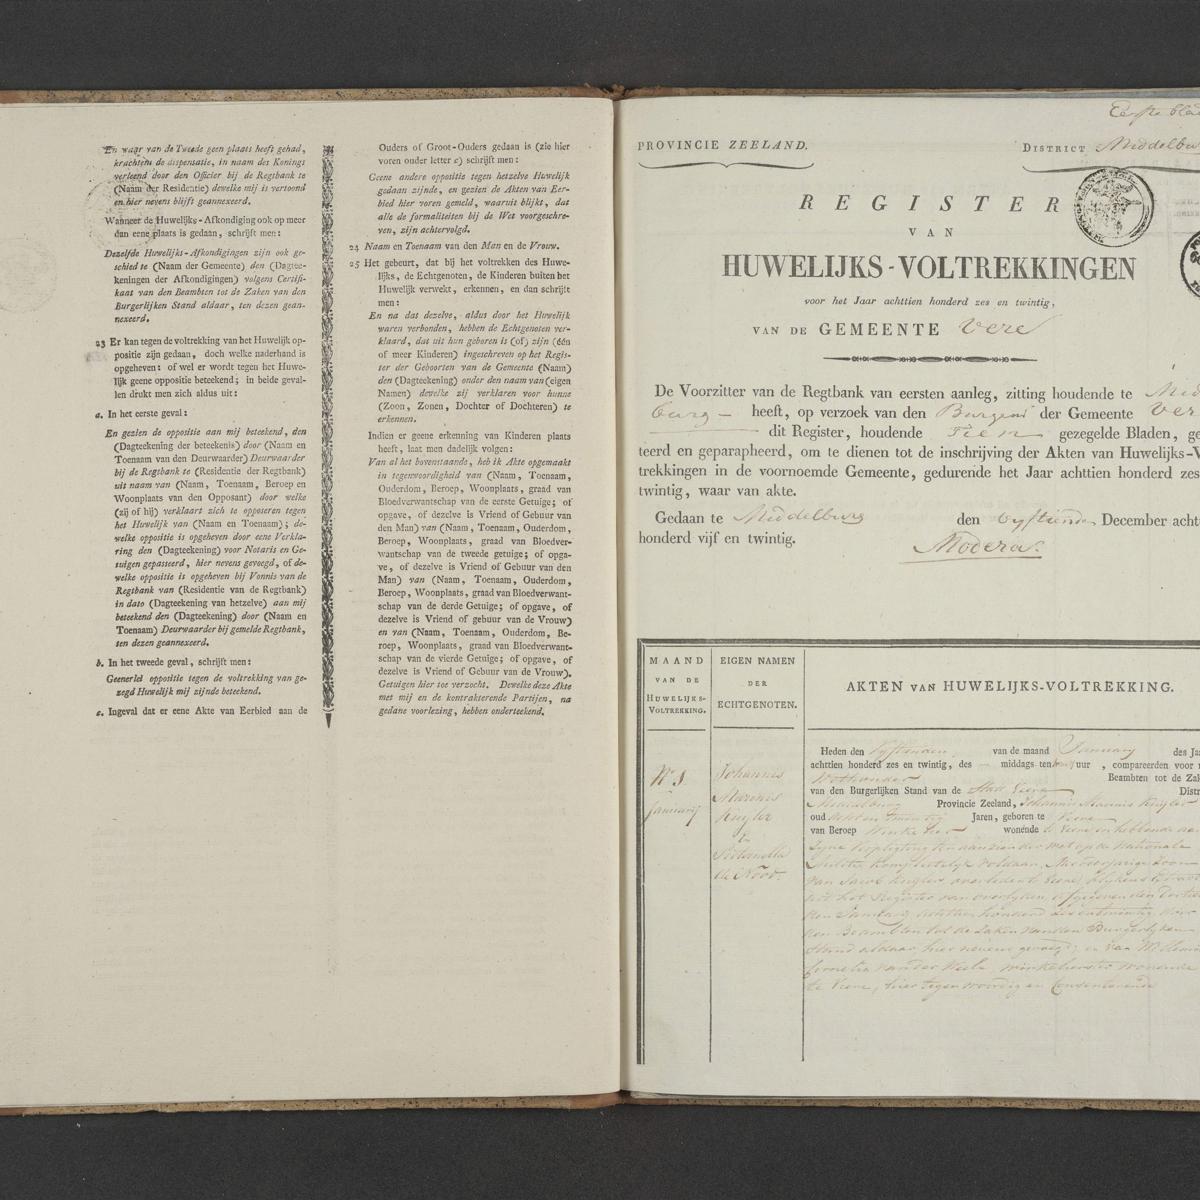 Civil registry of marriages, Veere, 1826, record 1